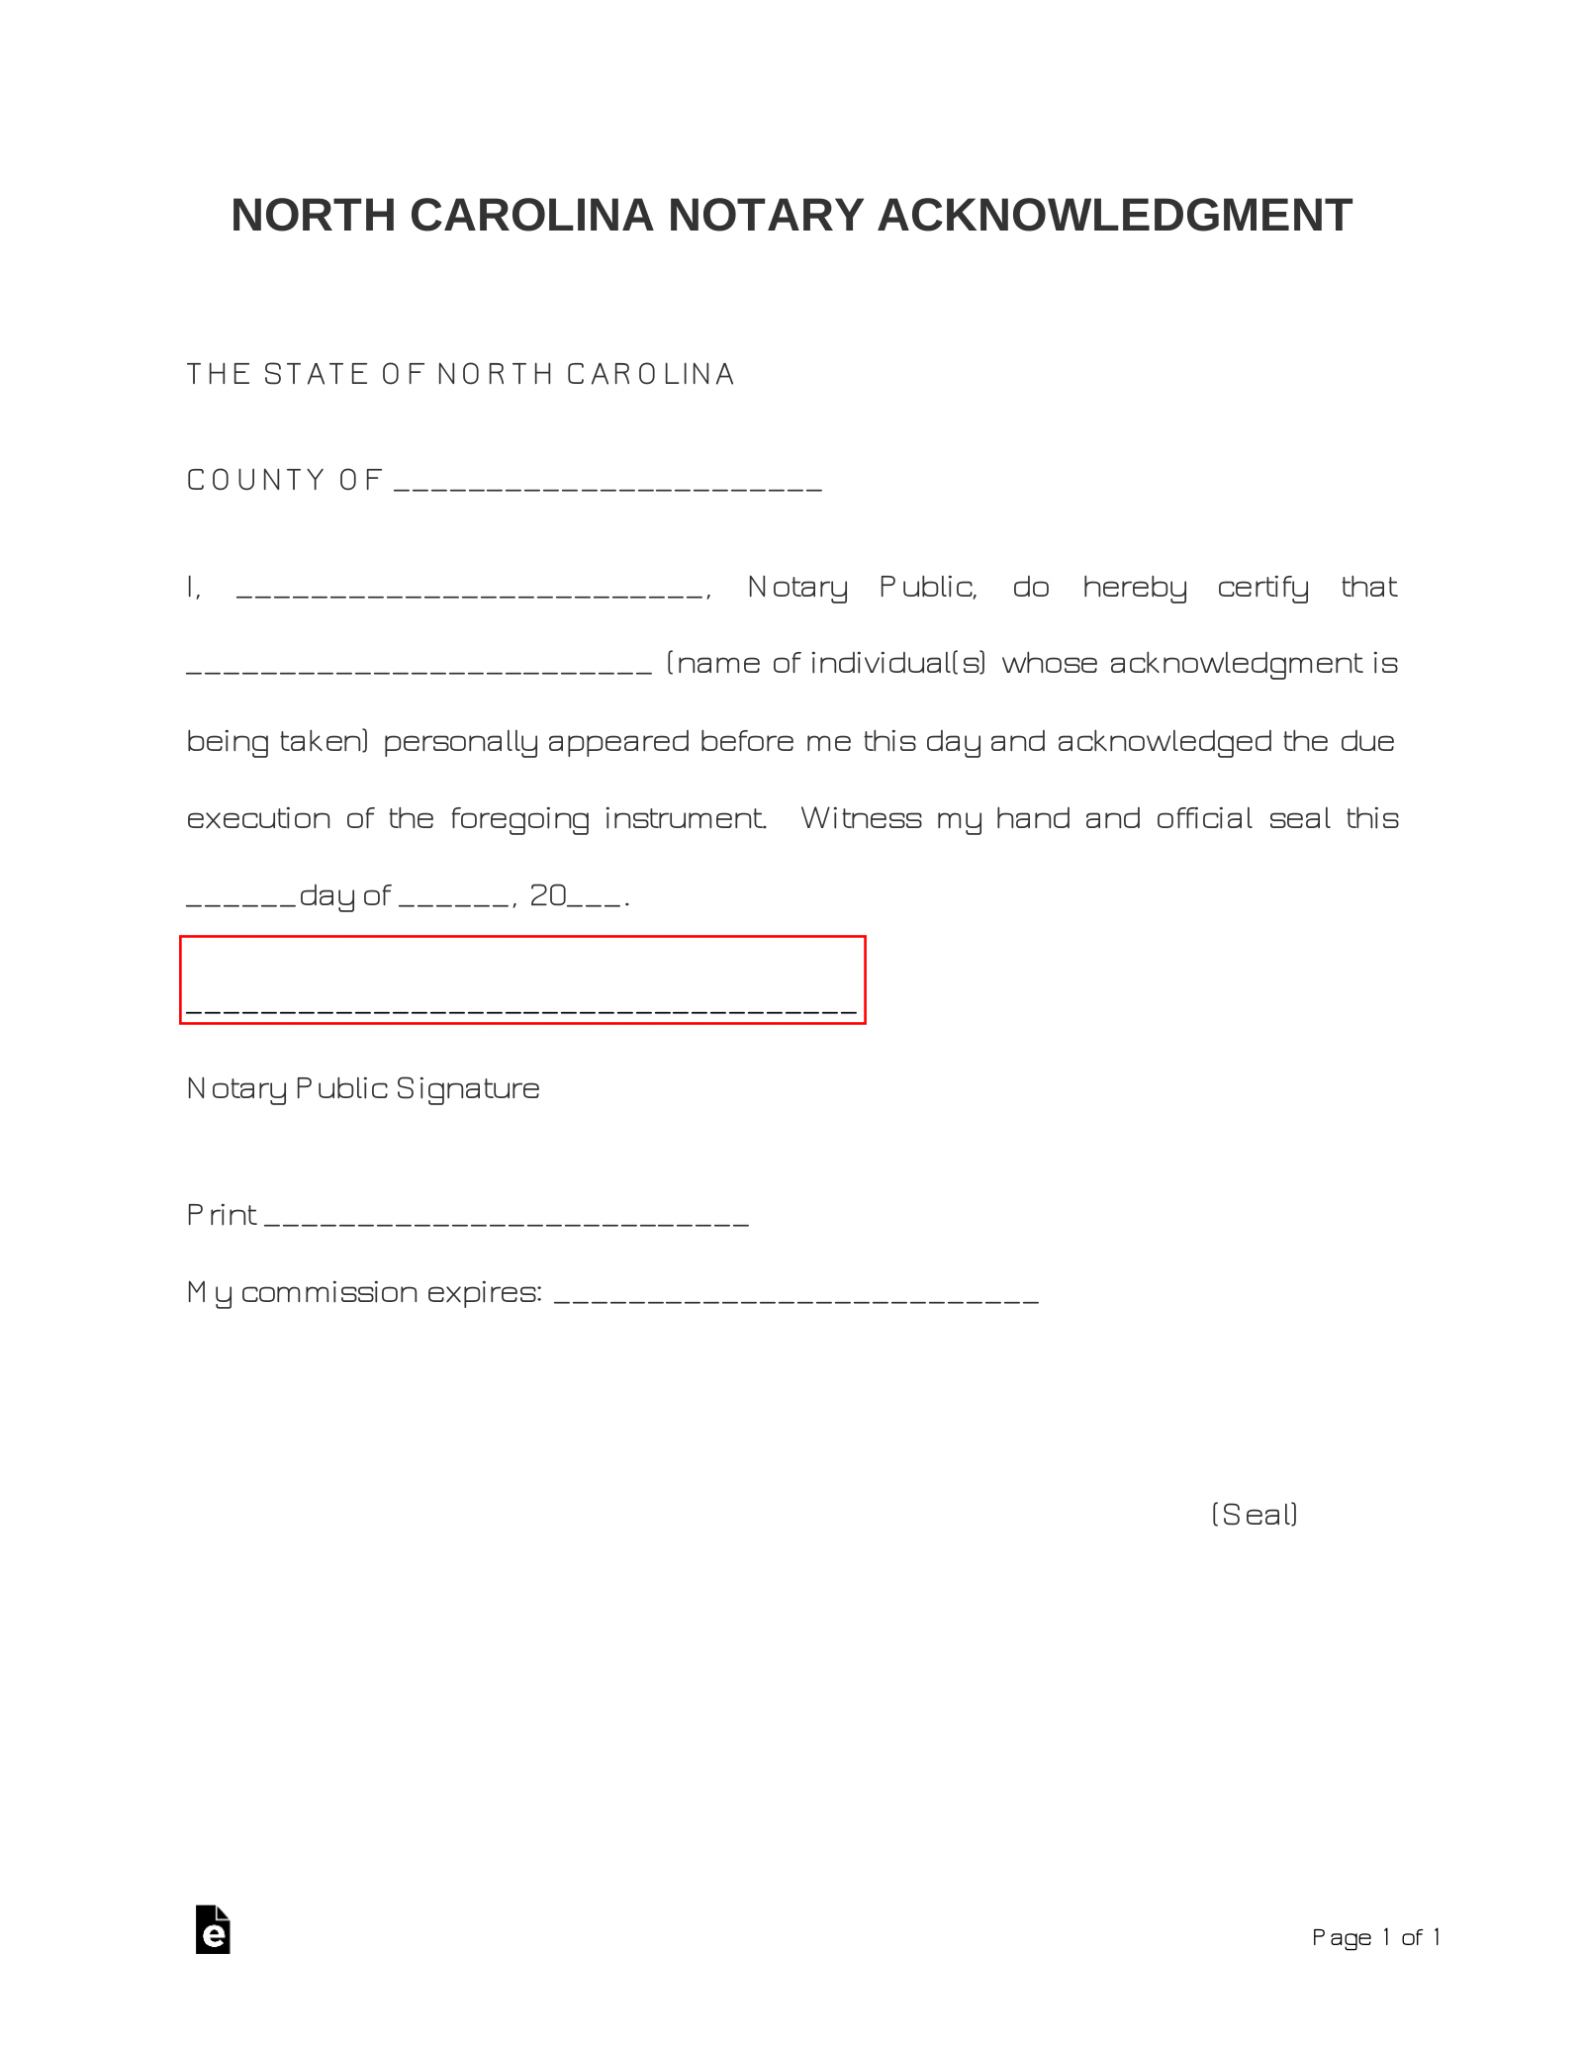 completed-notary-acknowledgement-sample-porn-sex-picture